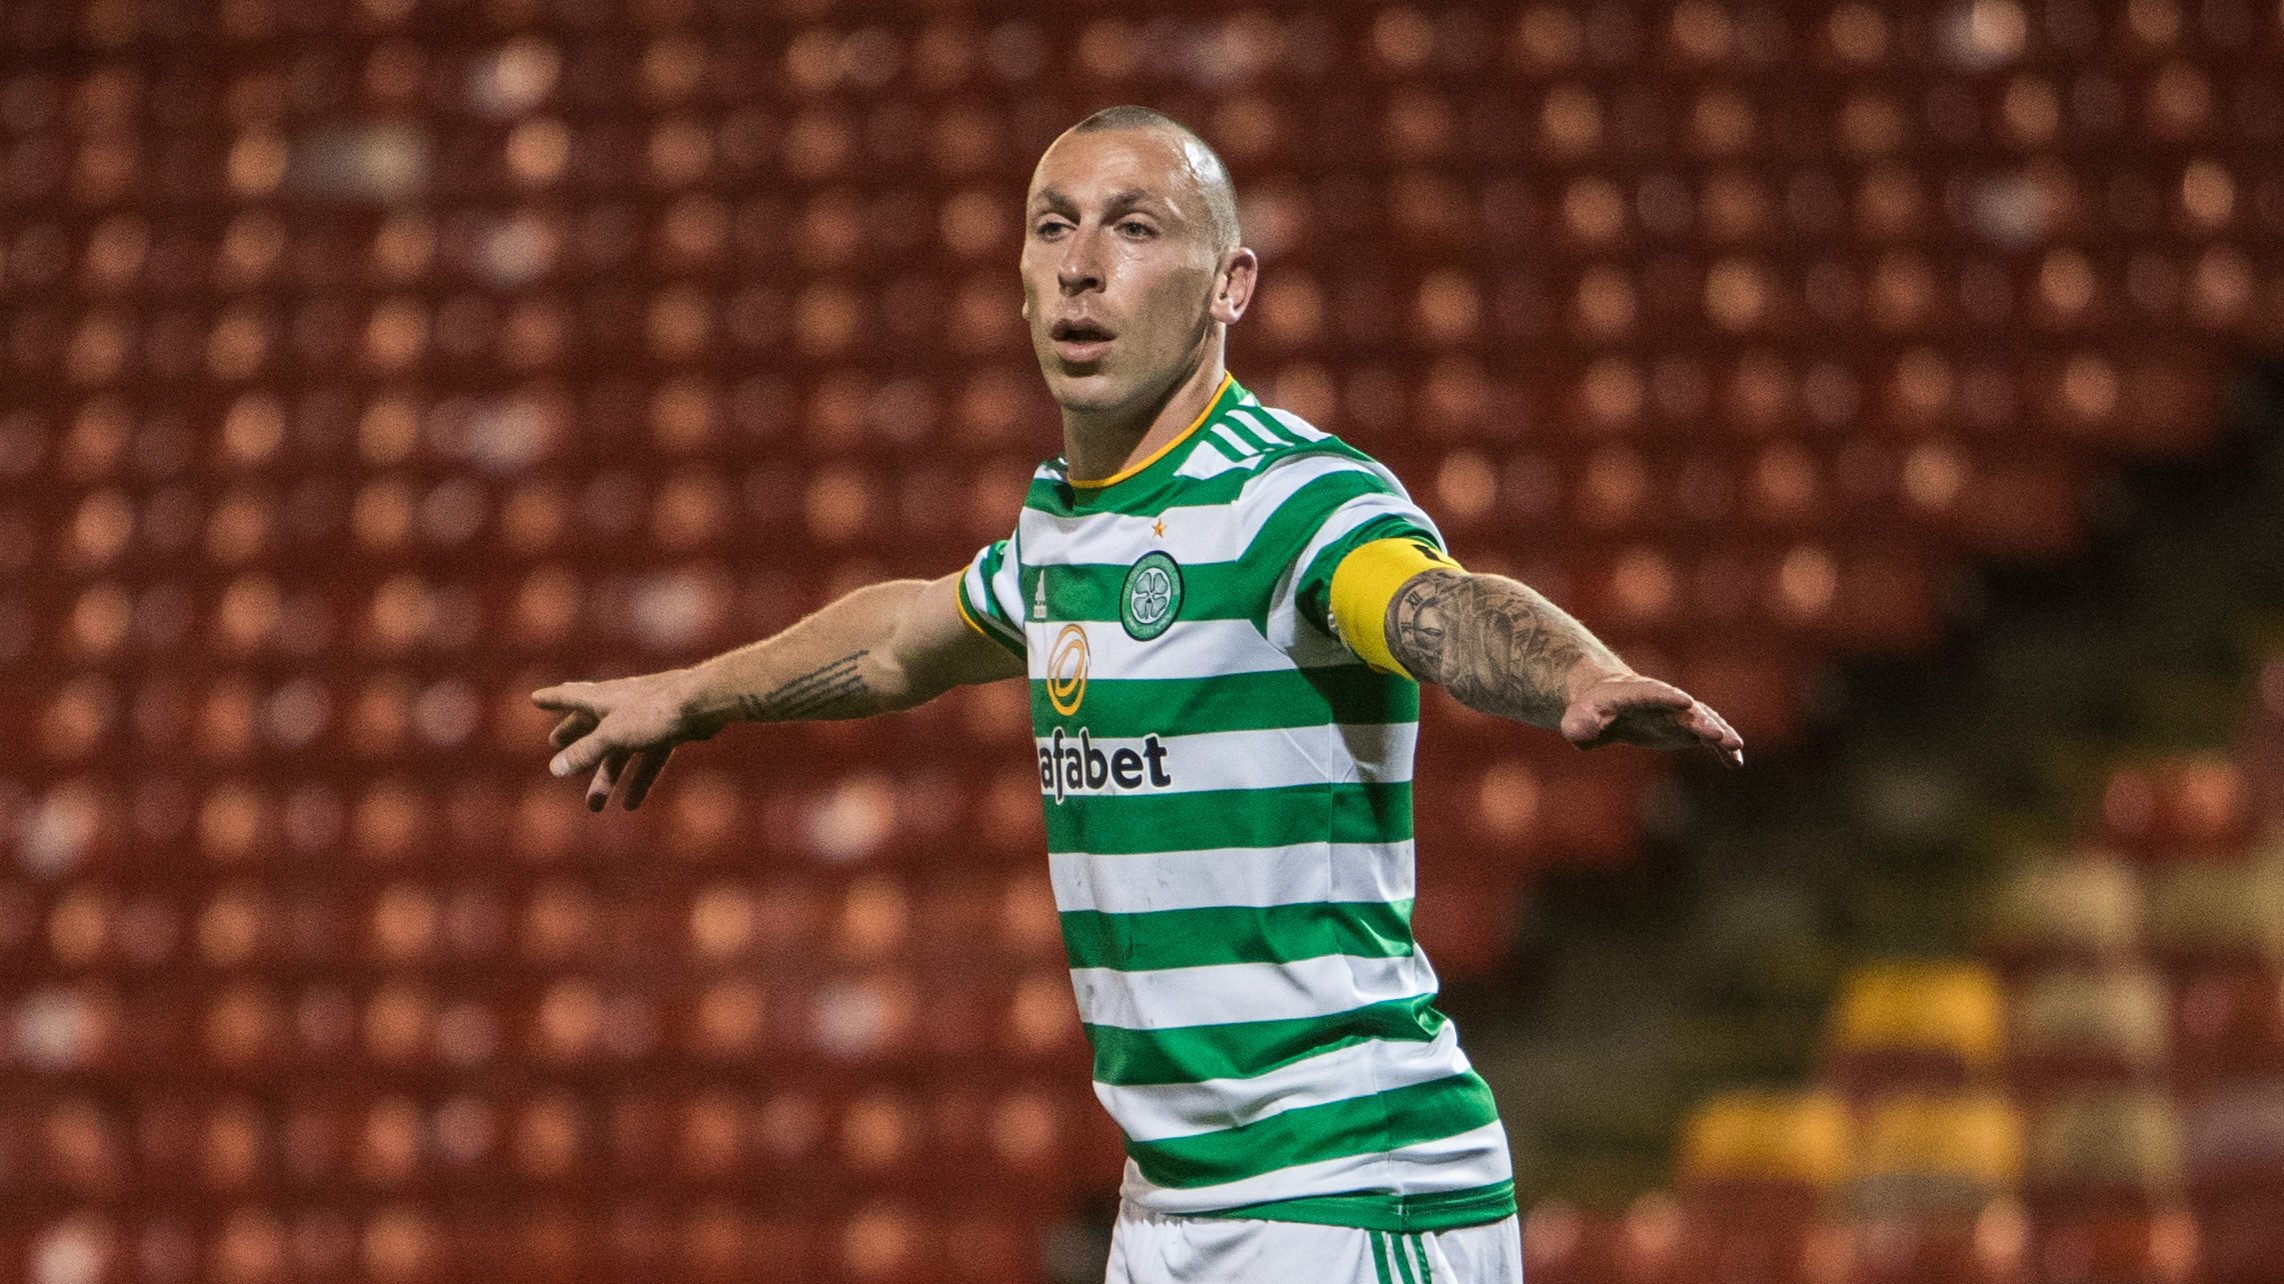 Life and soul: The candidates to fill unseen but important Celtic role